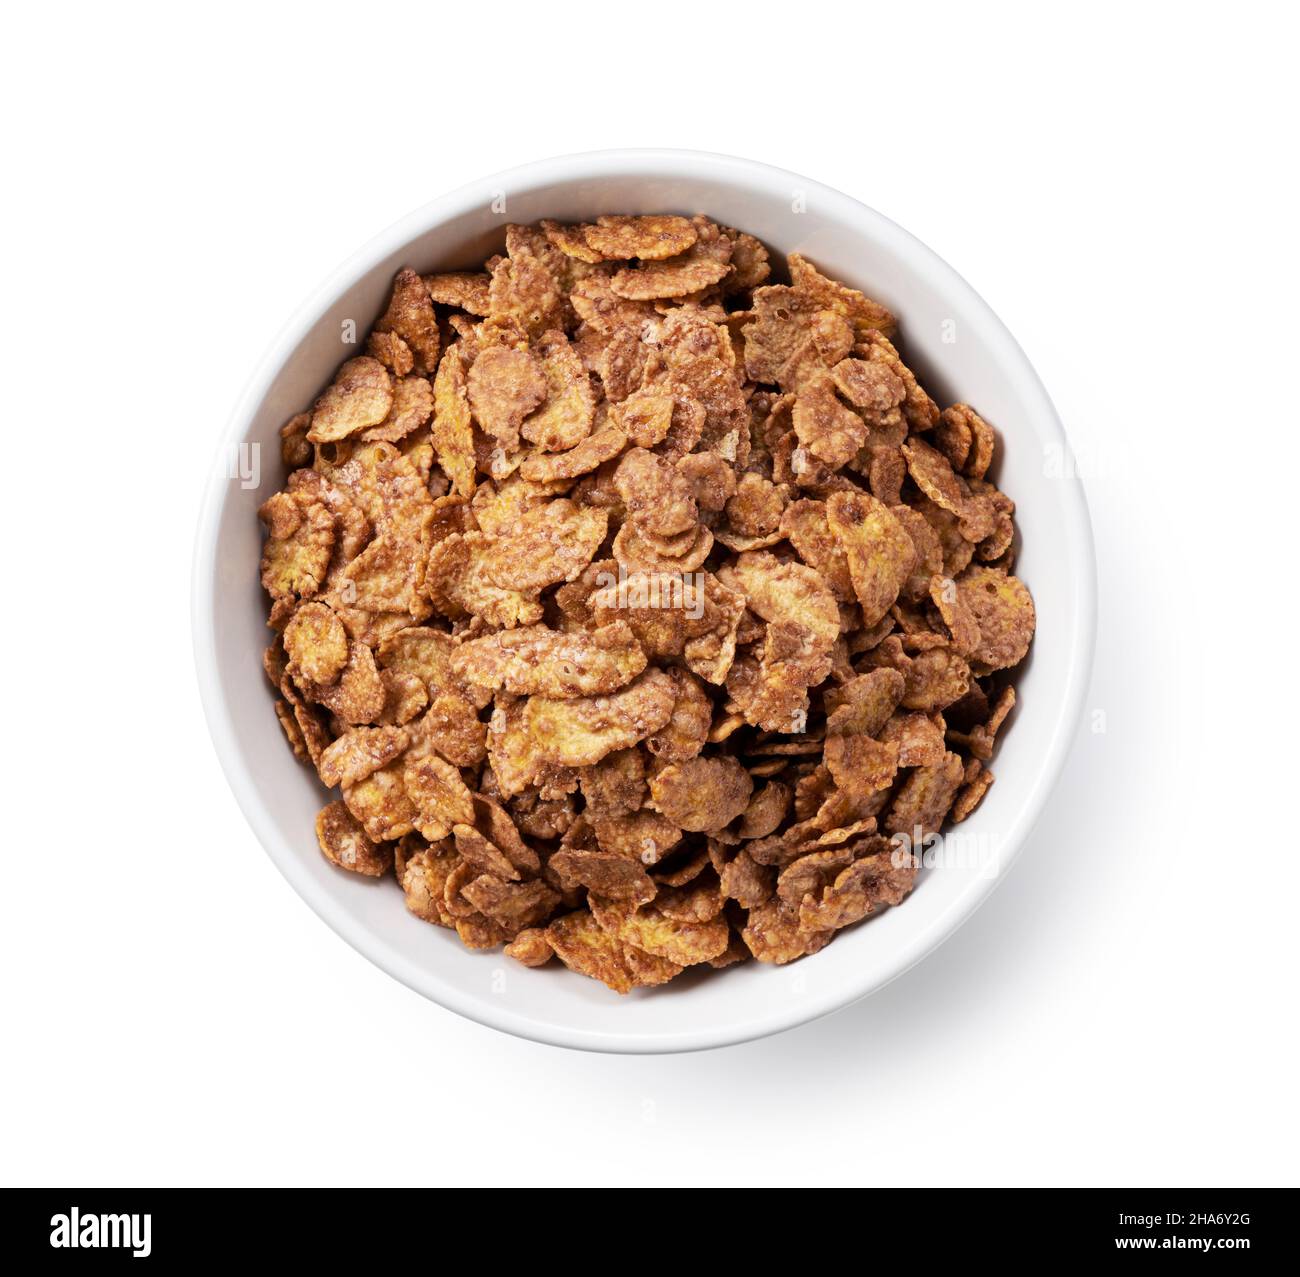 Chocolate cornflakes in a white ceramic bowl. View from directly above. Stock Photo